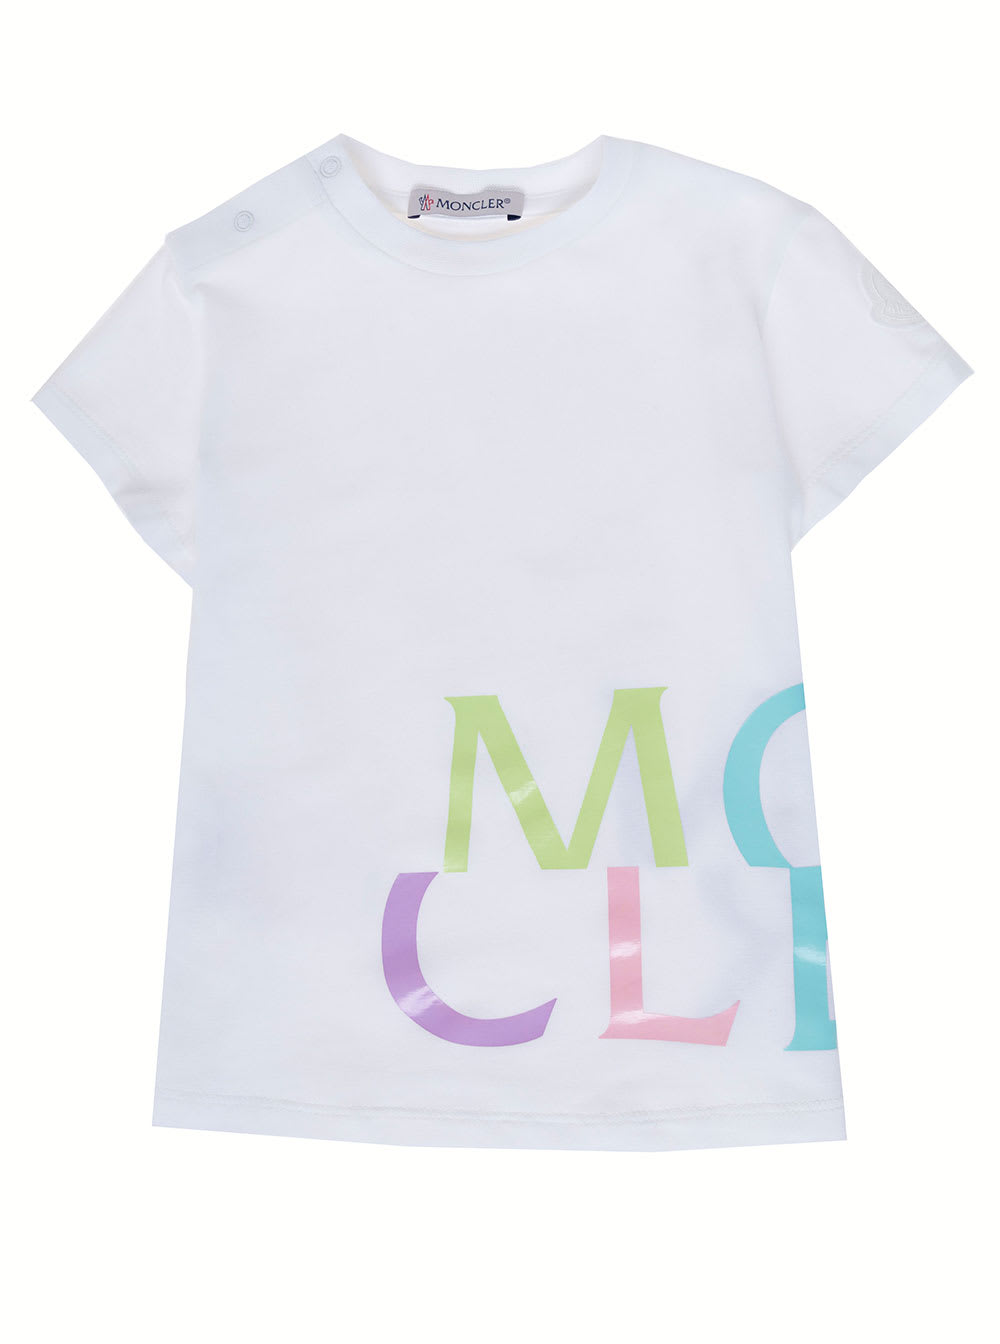 MONCLER GIRL COTTON WHITE T-SHIRT WITH PRINT